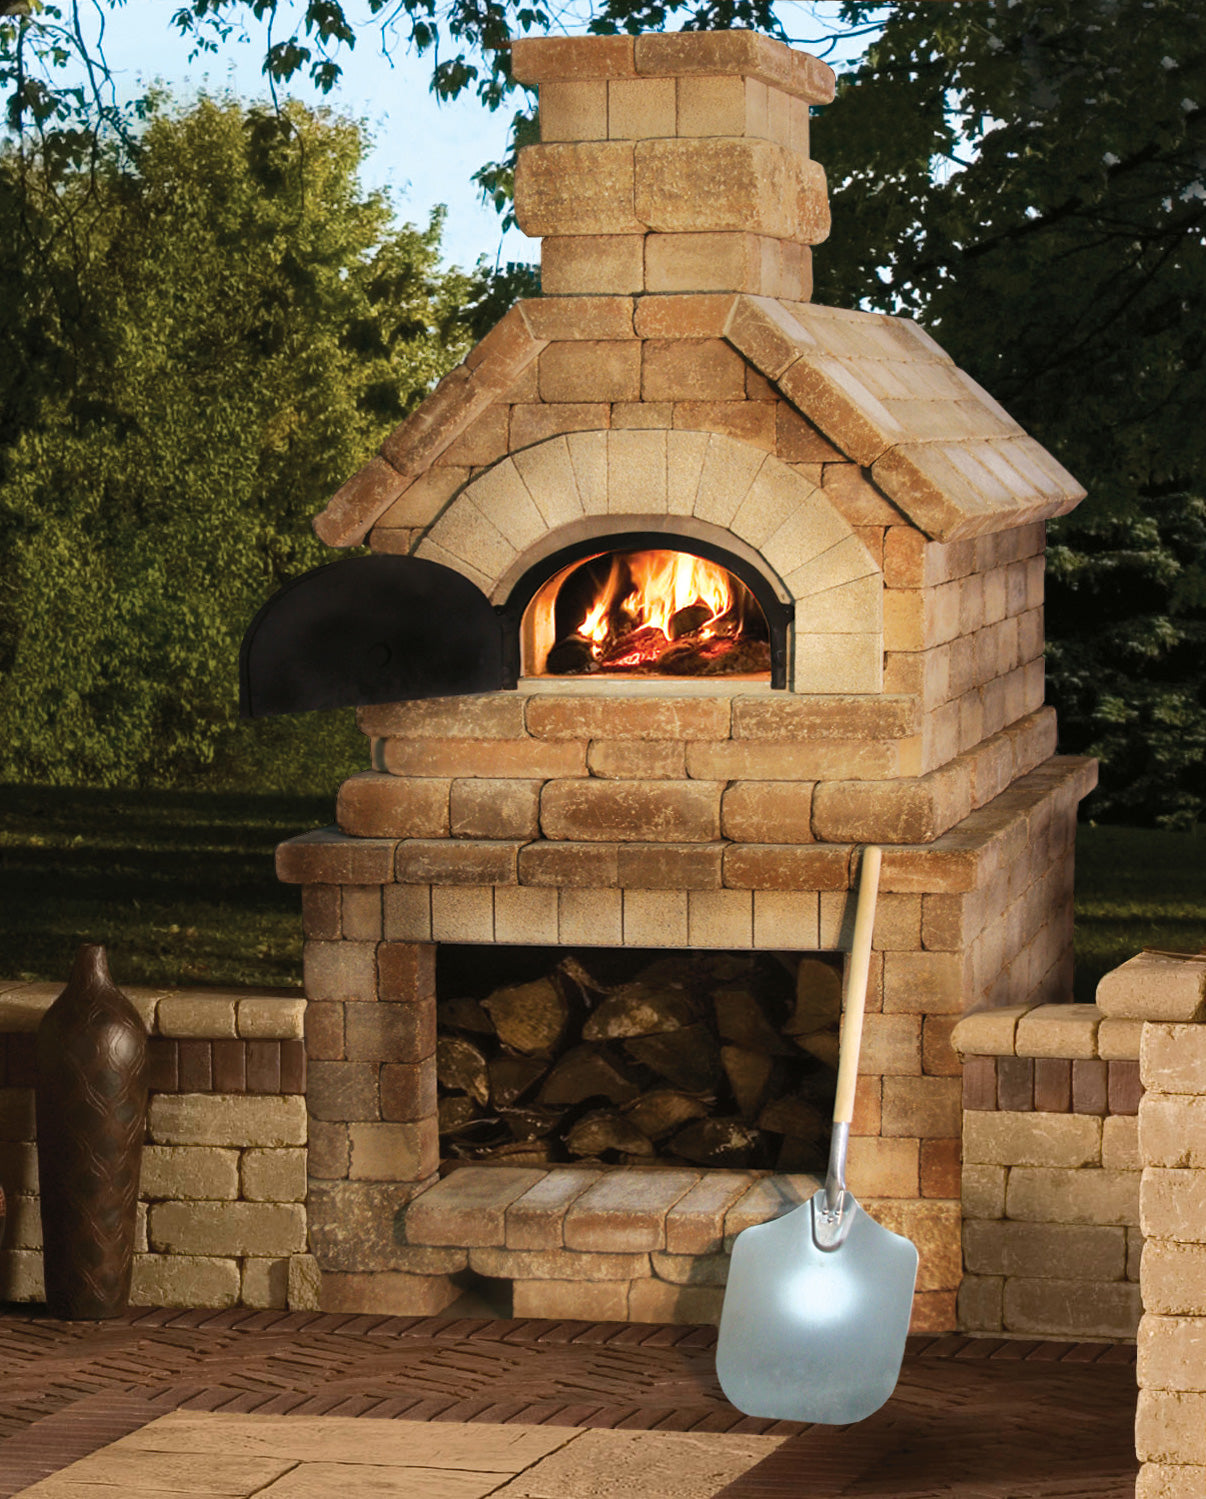 Everything Tastes Better Cooked In A Brick Pizza Oven